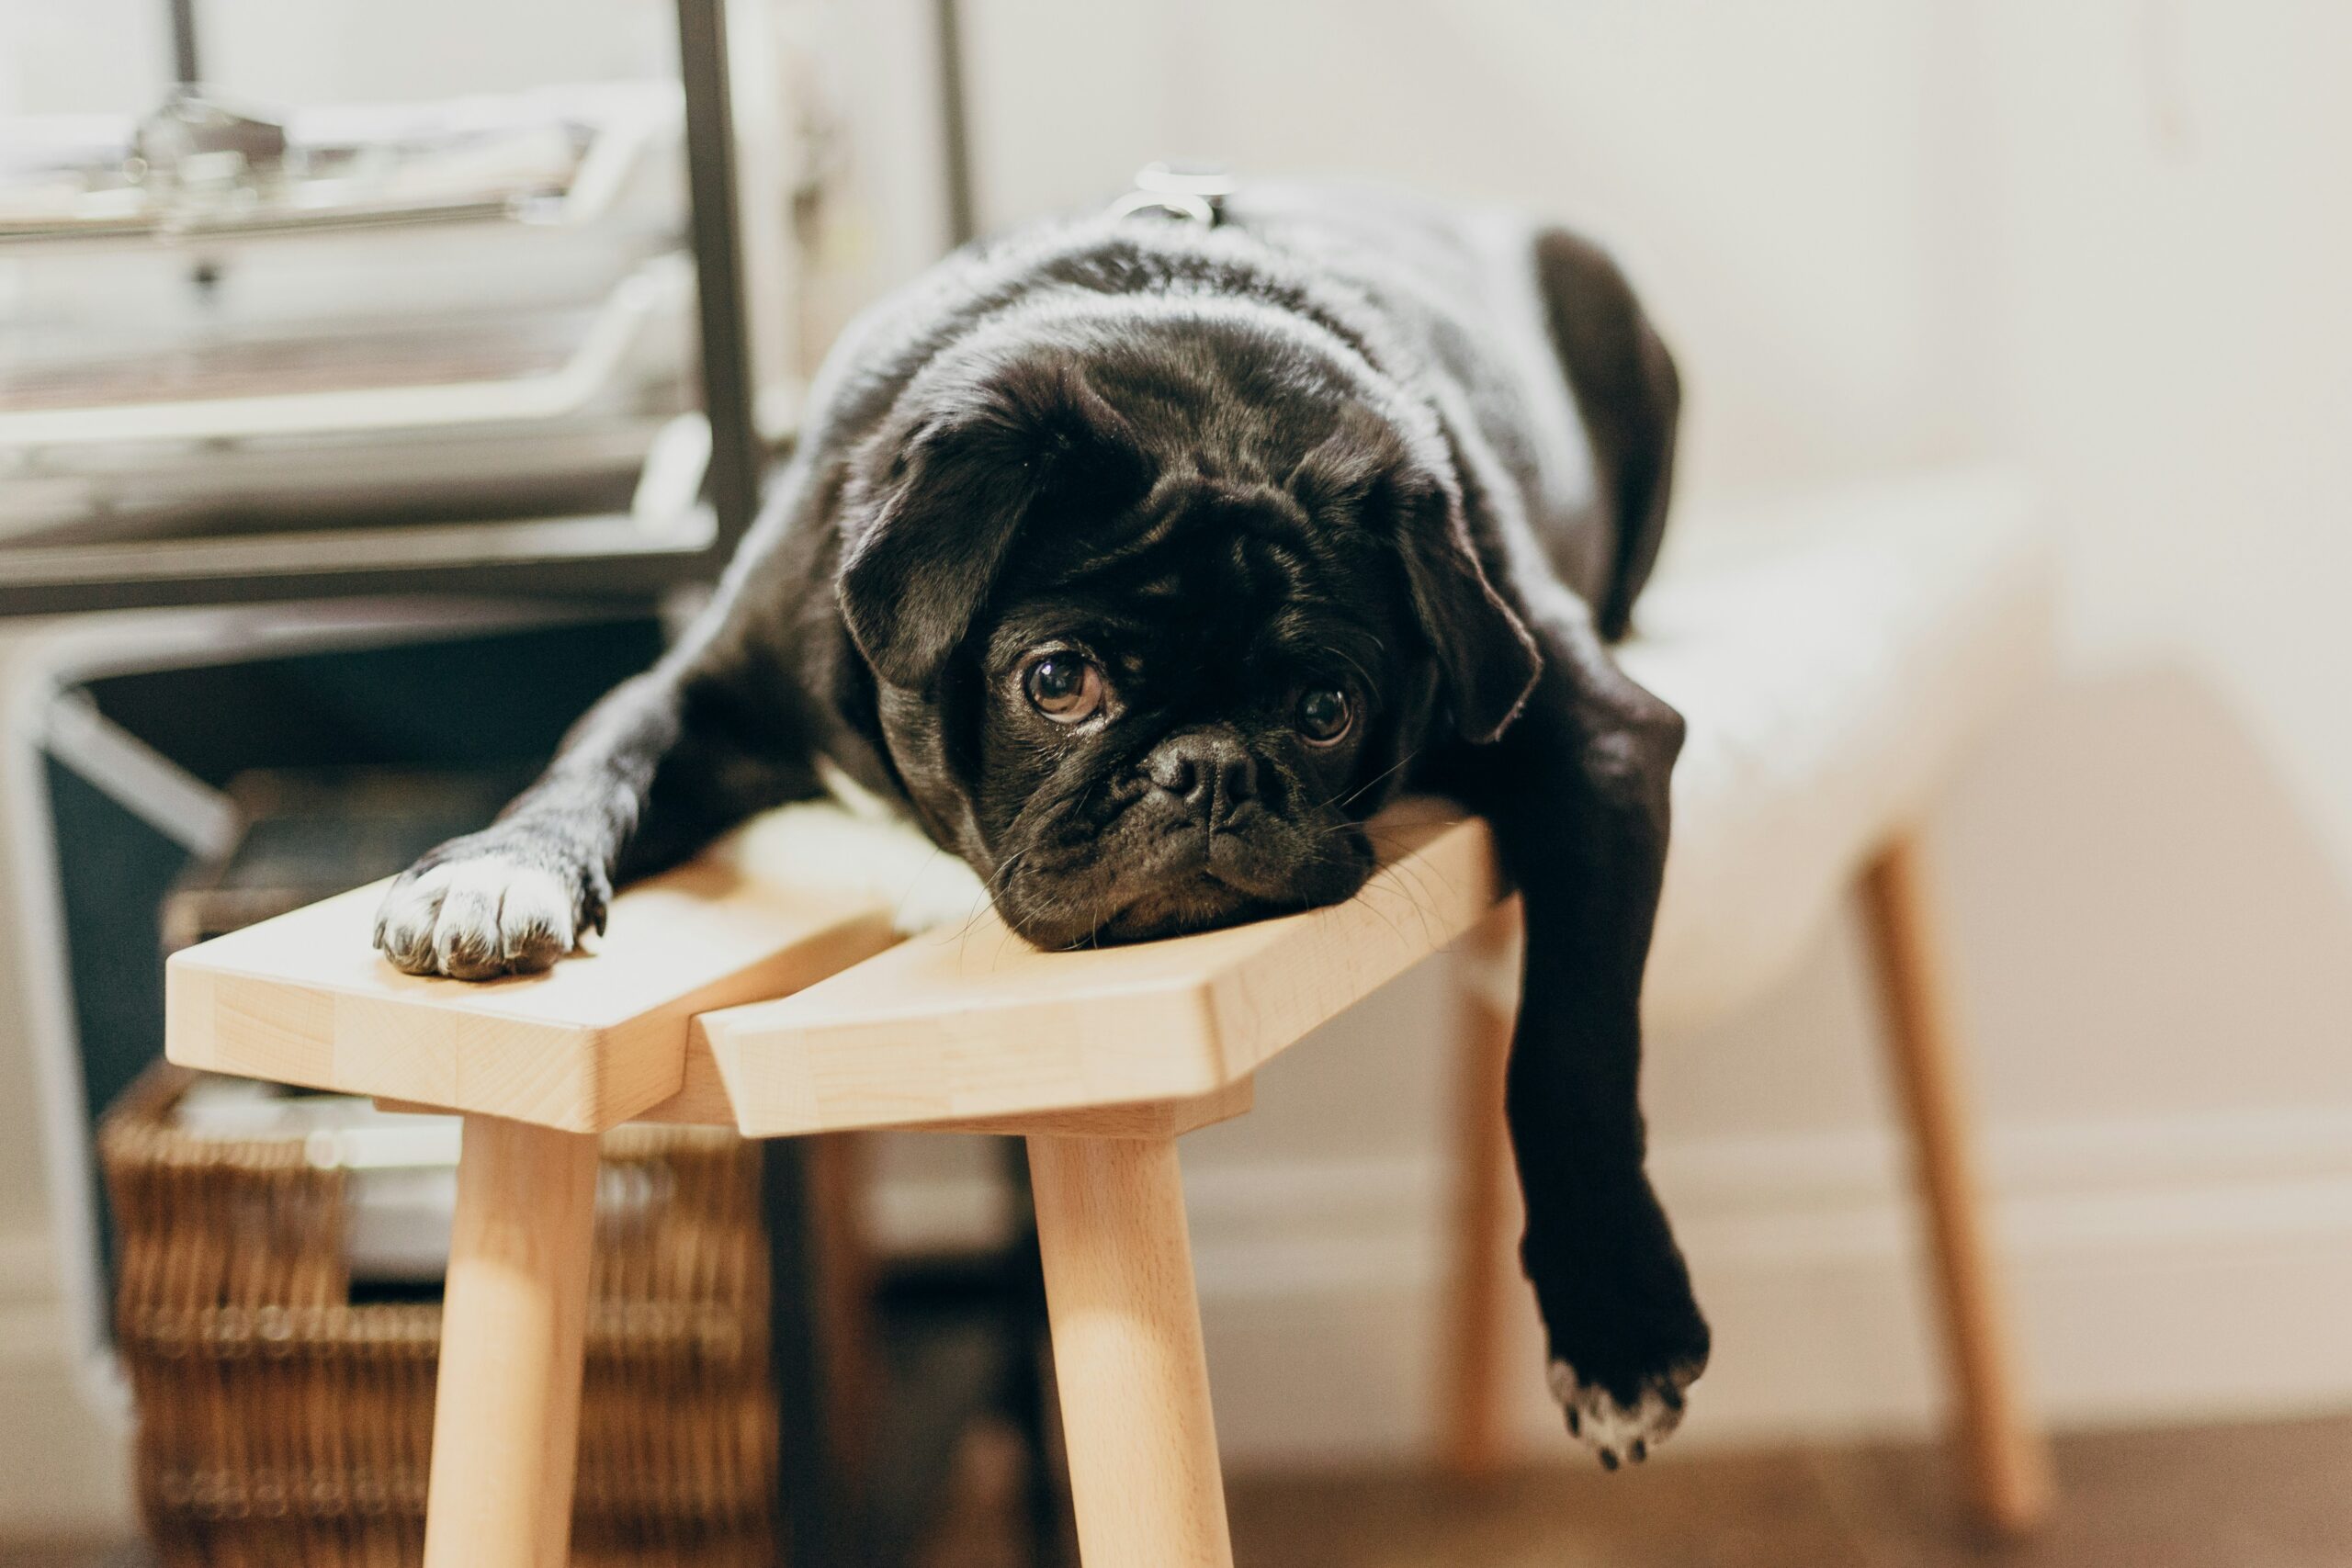 A cute, tired-looking pug lays on a stool, illustrating donor fatigue